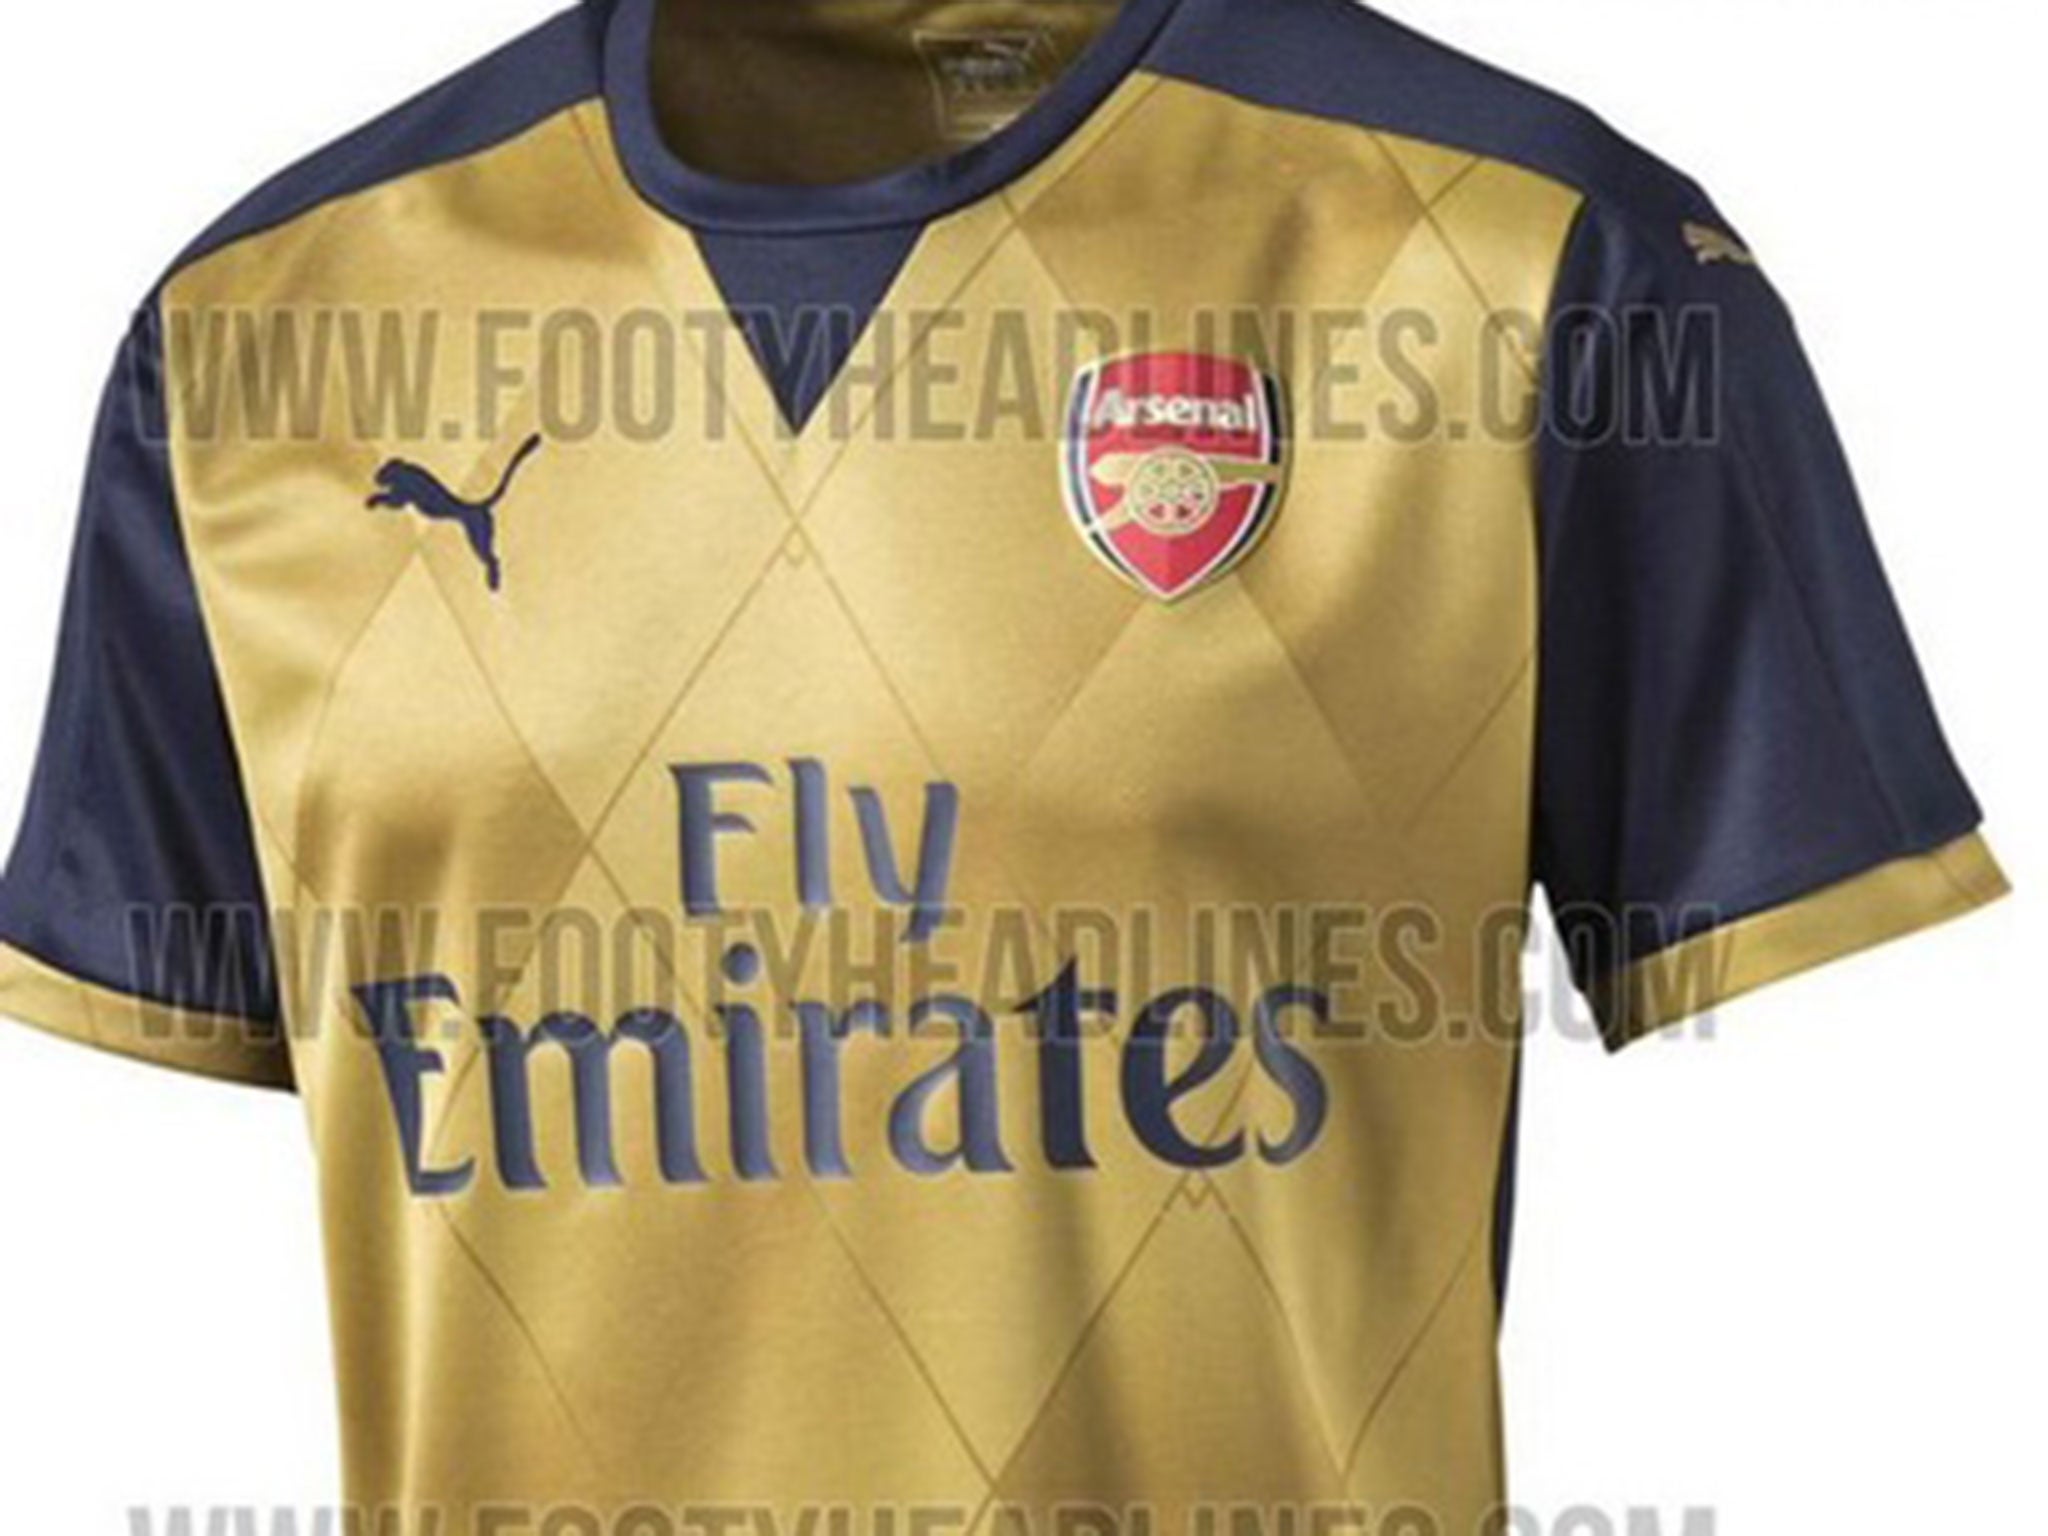 A leaked image of Arsenal's new away shirt